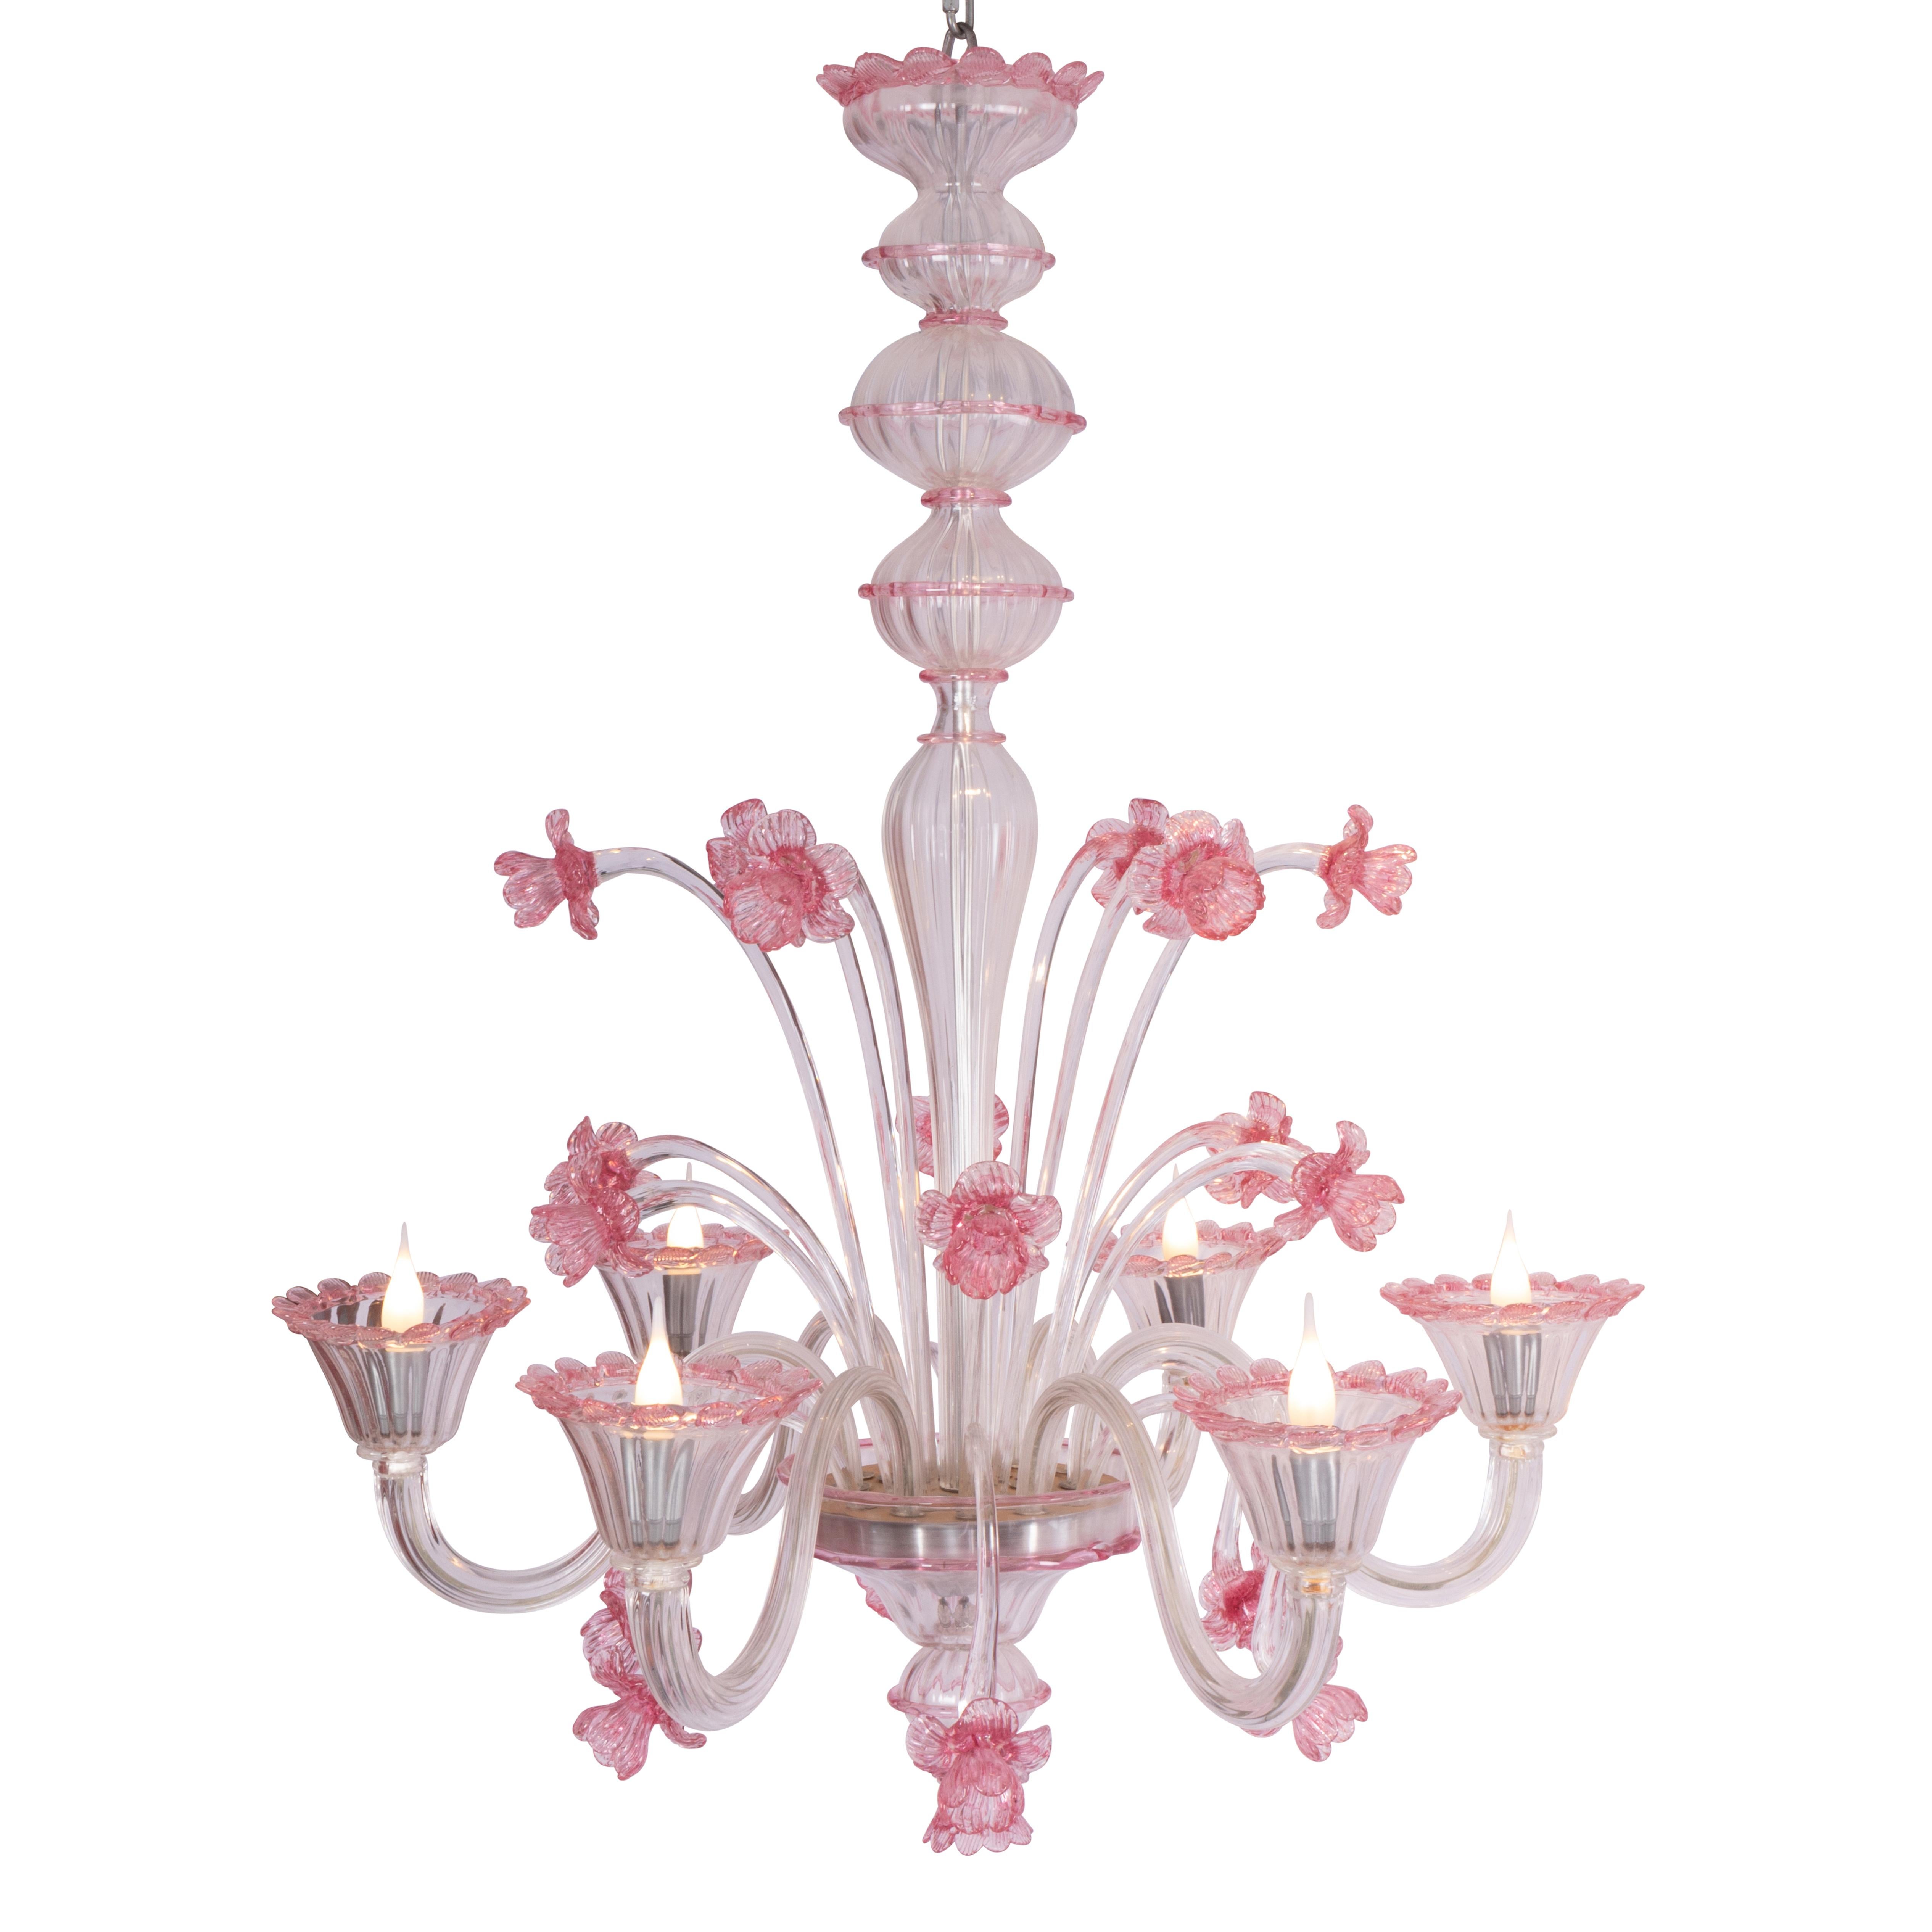 20th Century Pauly and C°, Murano Pastoral Chandelier, Pink Crystal Flowers Foliage, 1970's For Sale